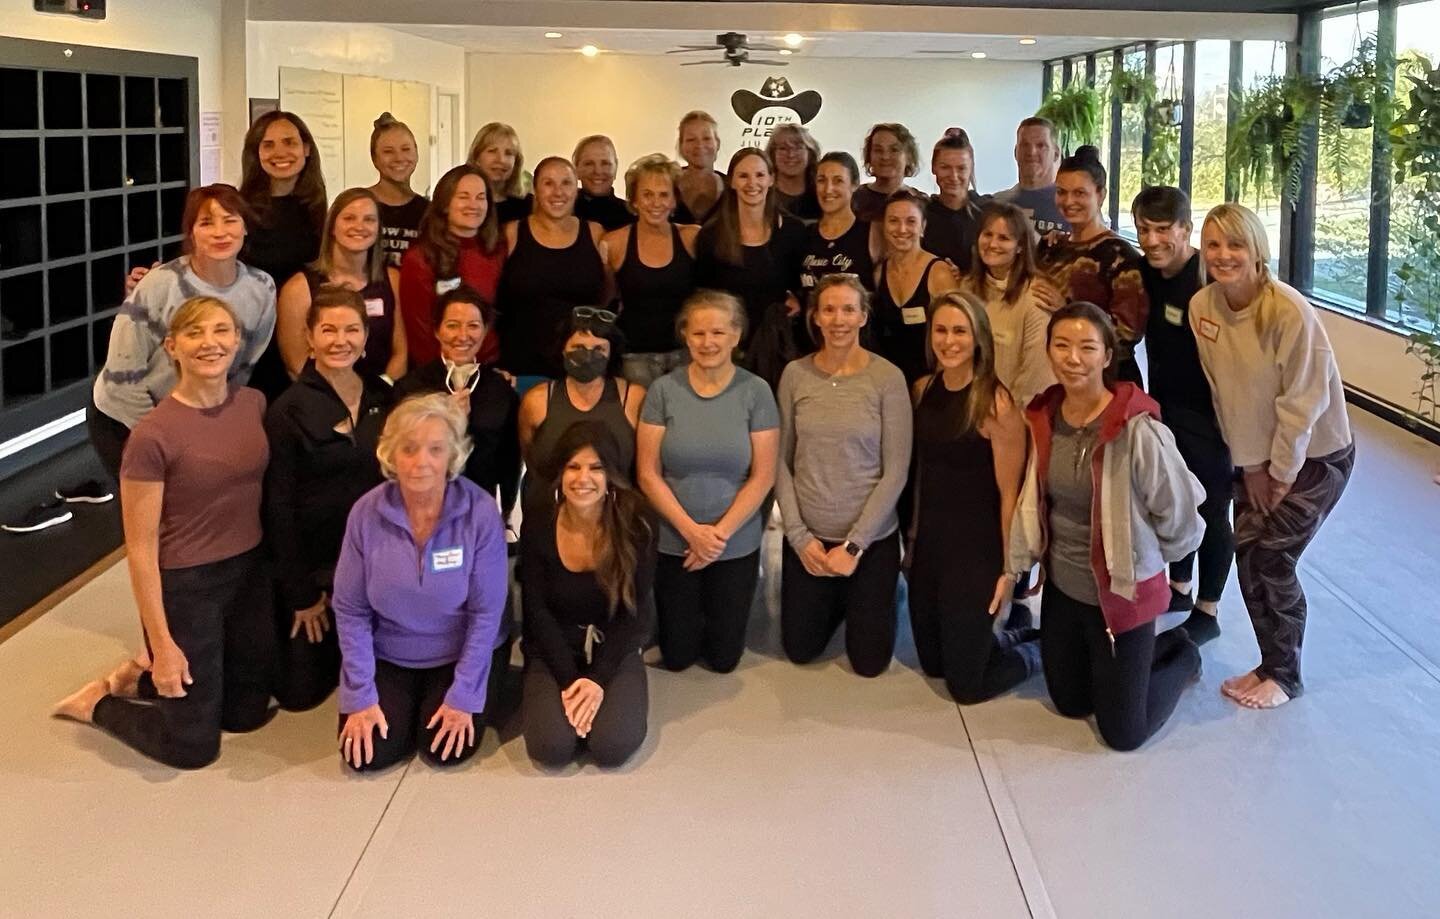 What a weekend!!! 🤩🤩🤩 We loved sharing the first Nashville Continuing Education Weekend with a wonderful group of Pilates instructors. We learned so many new ways to assist our clients in moving their bodies better. 🤯

What did you take away from